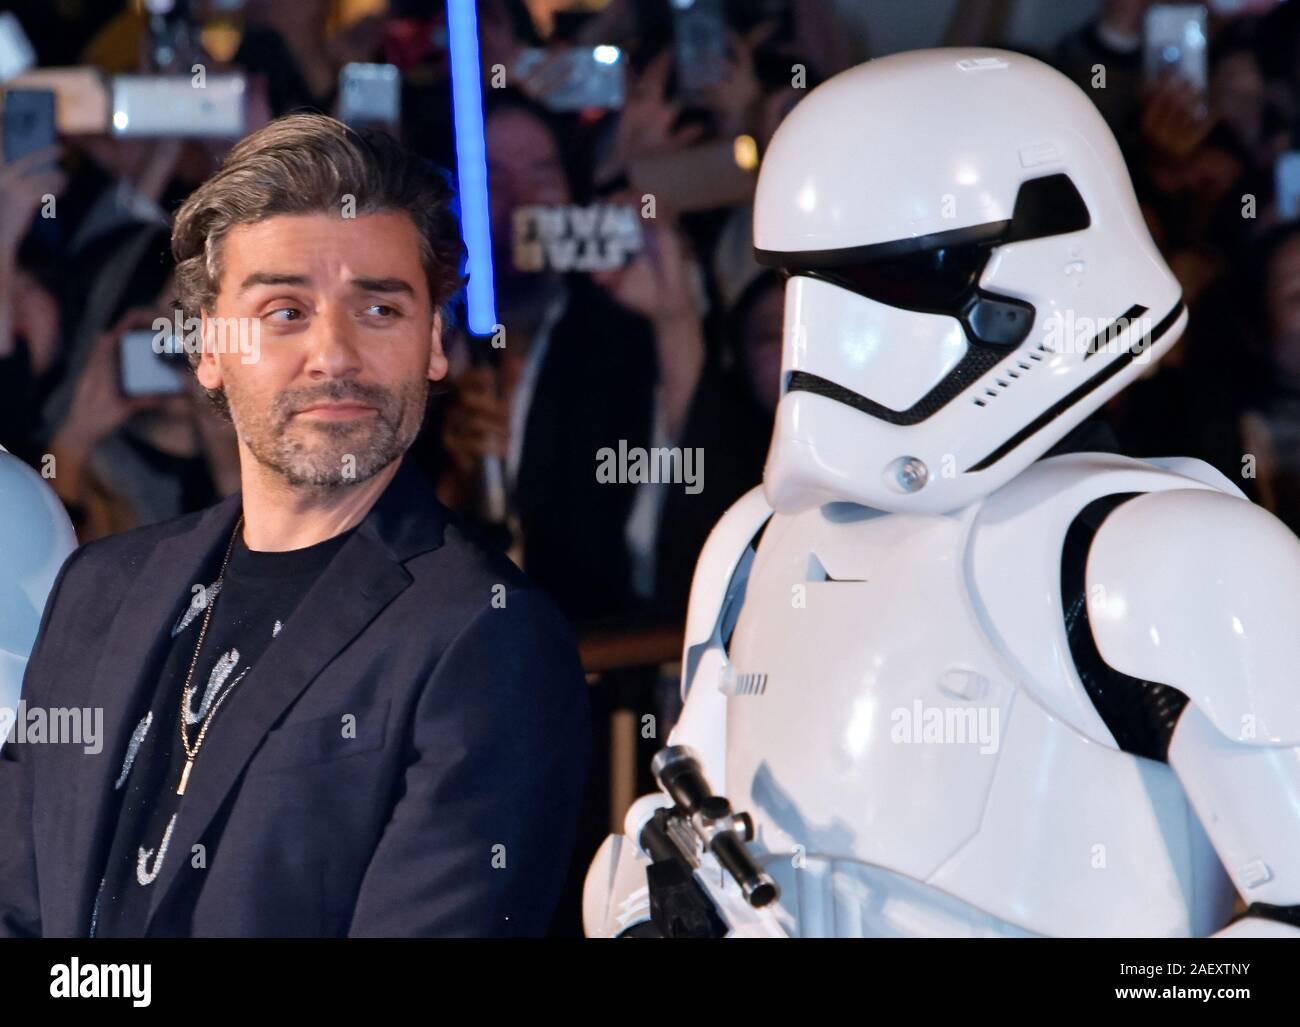 Tokyo, Japan. 11th Dec, 2019. Actor Oscar Isaac(L) attends the Japan premiere for the film 'Star Wars: The Rise of Skywalker' in Tokyo, Japan on Wednesday, December 11, 2019. This film will open on December 20th in the world. Prior to this, special screening will be held at Hokkaido, Tokyo, Aichi, Osaka and Fukuoka in Japan on December 19th. Credit: UPI/Alamy Live News Stock Photo